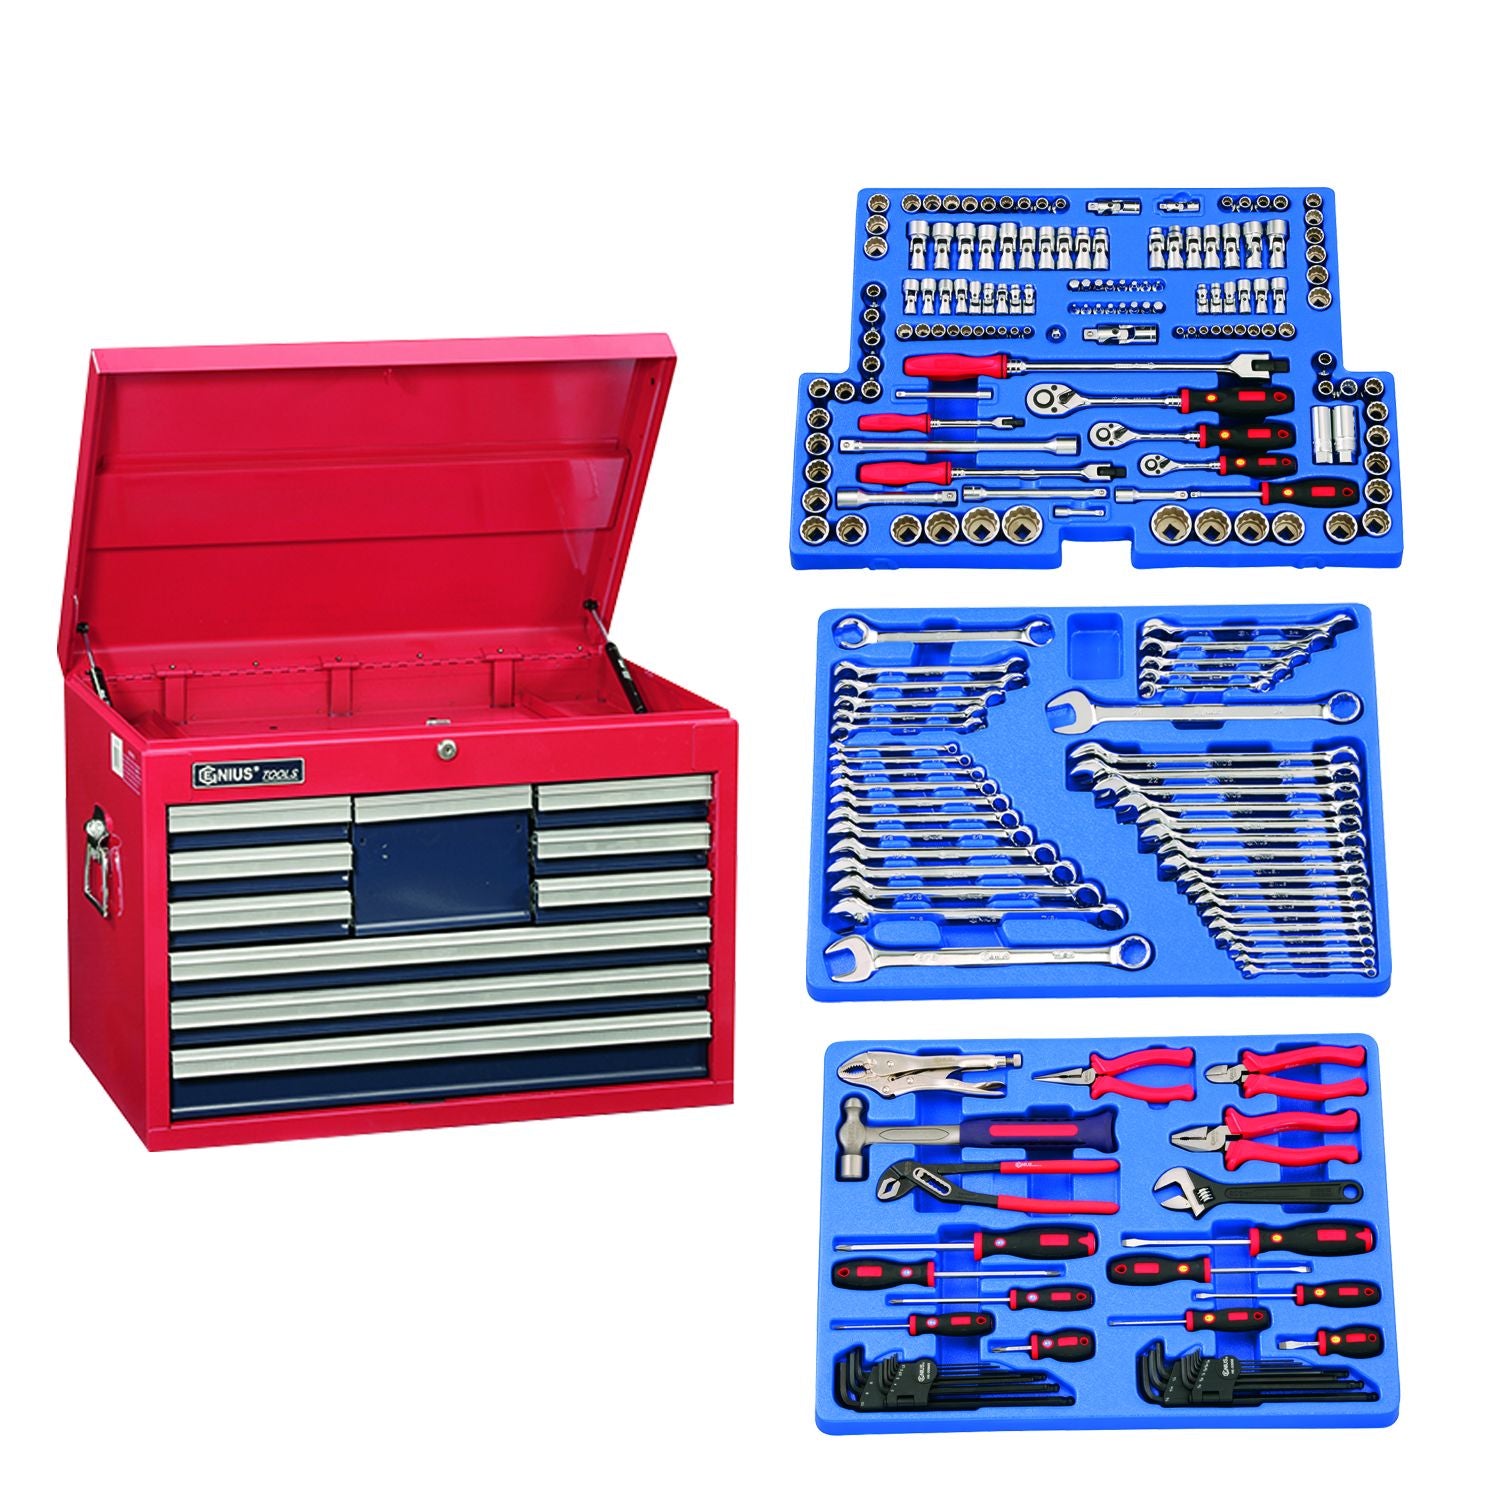 Genius MS-215TS - 215 Piece 1/4", 3/8" & 1/2" Drive Metric & SAE Tool Set and Top Chest with 10 Drawers